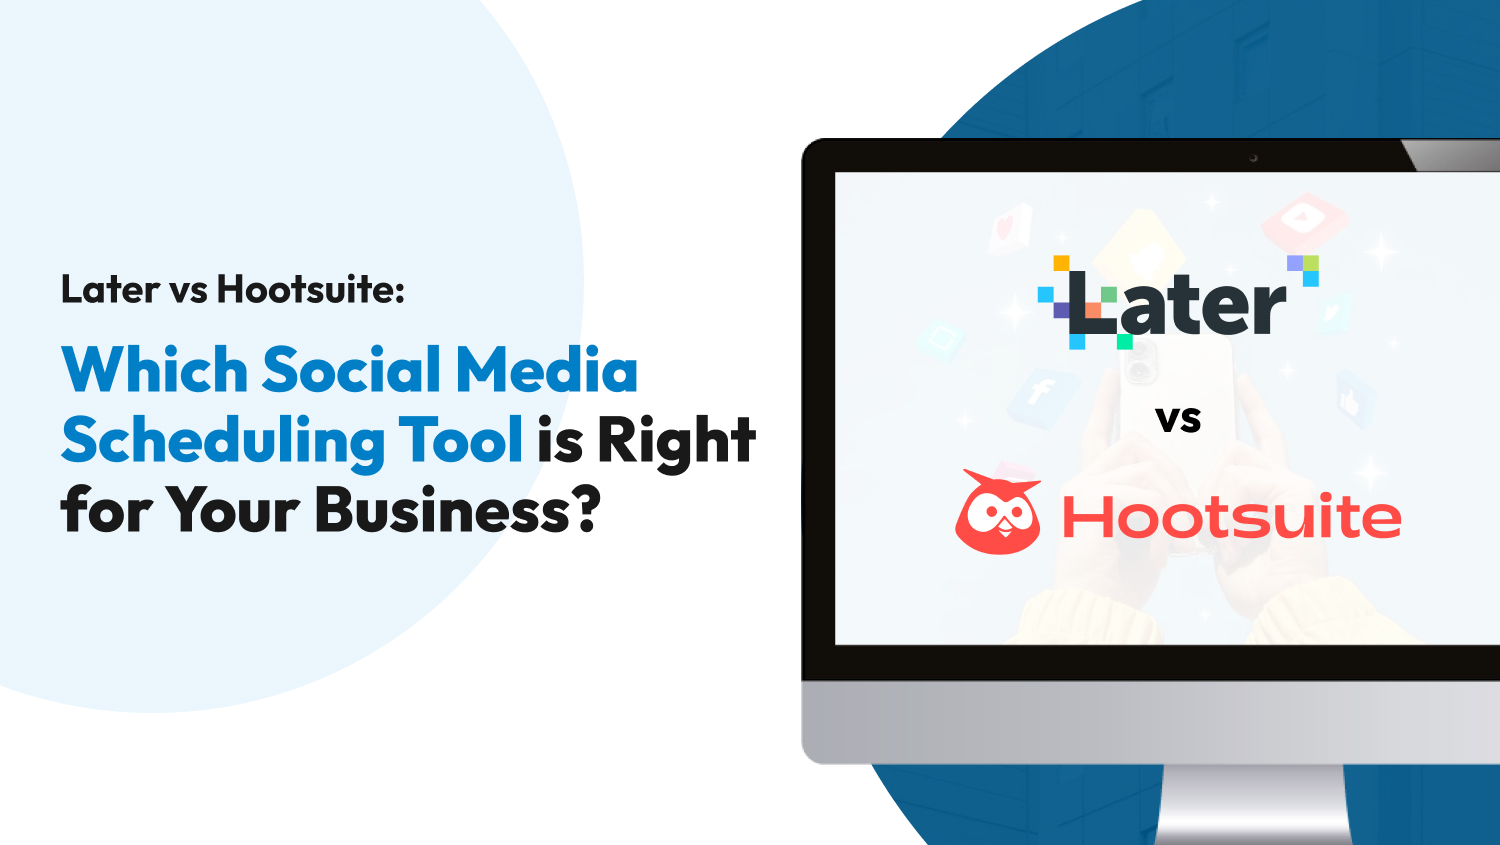 Later vs Hootsuite: Which Social Media Scheduling Tool is Right for Your Business?